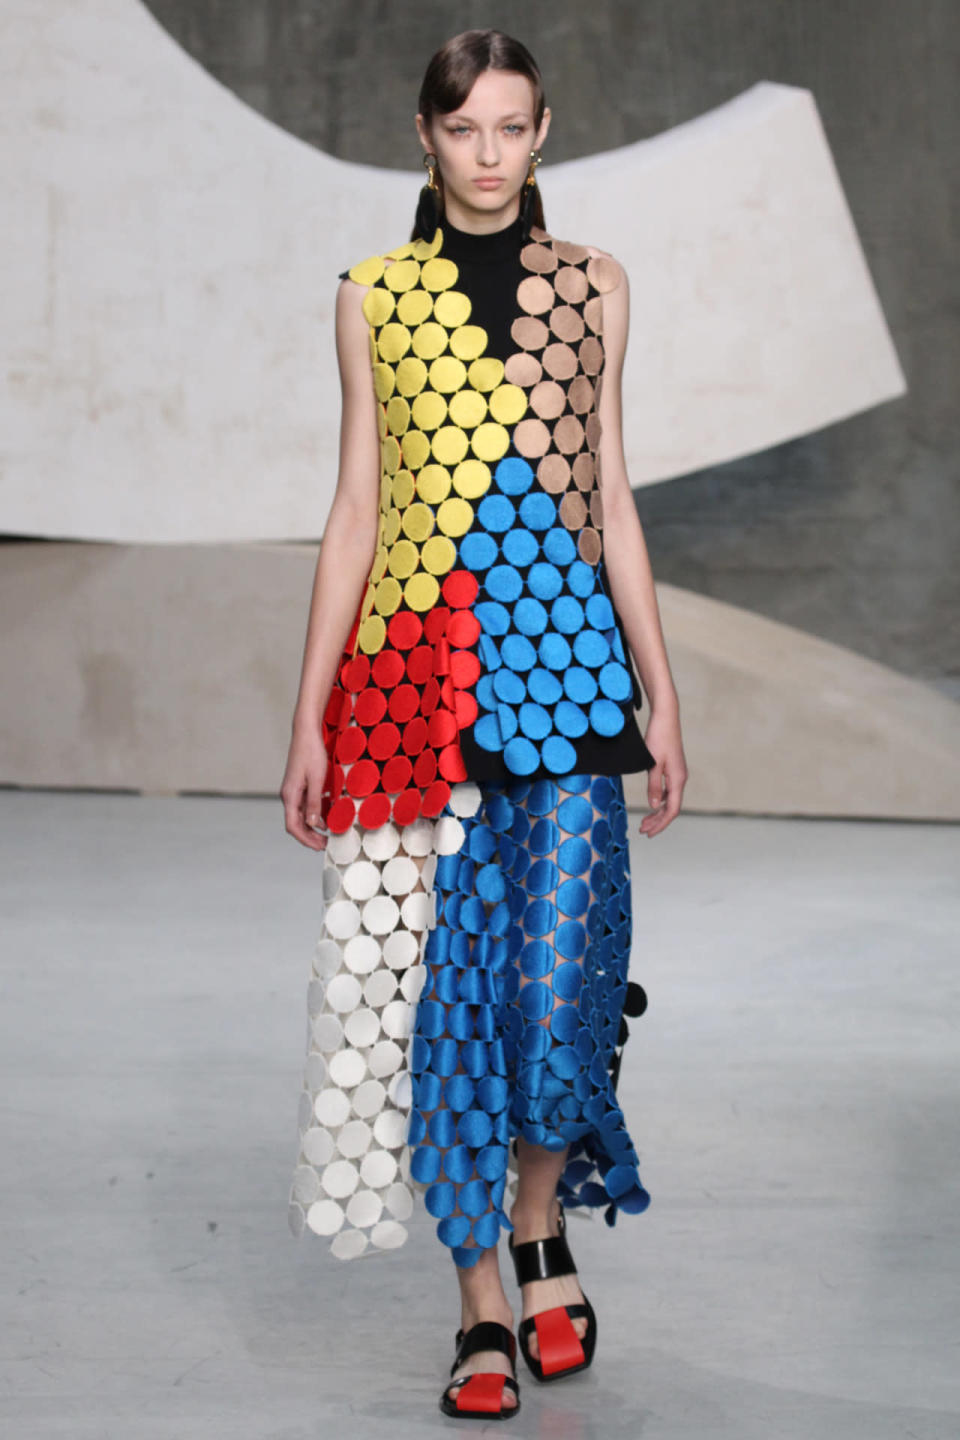 A model wears a colorblocked circle dress at Marni’s spring 2016 show in Milan. (Photo: Getty Images.)